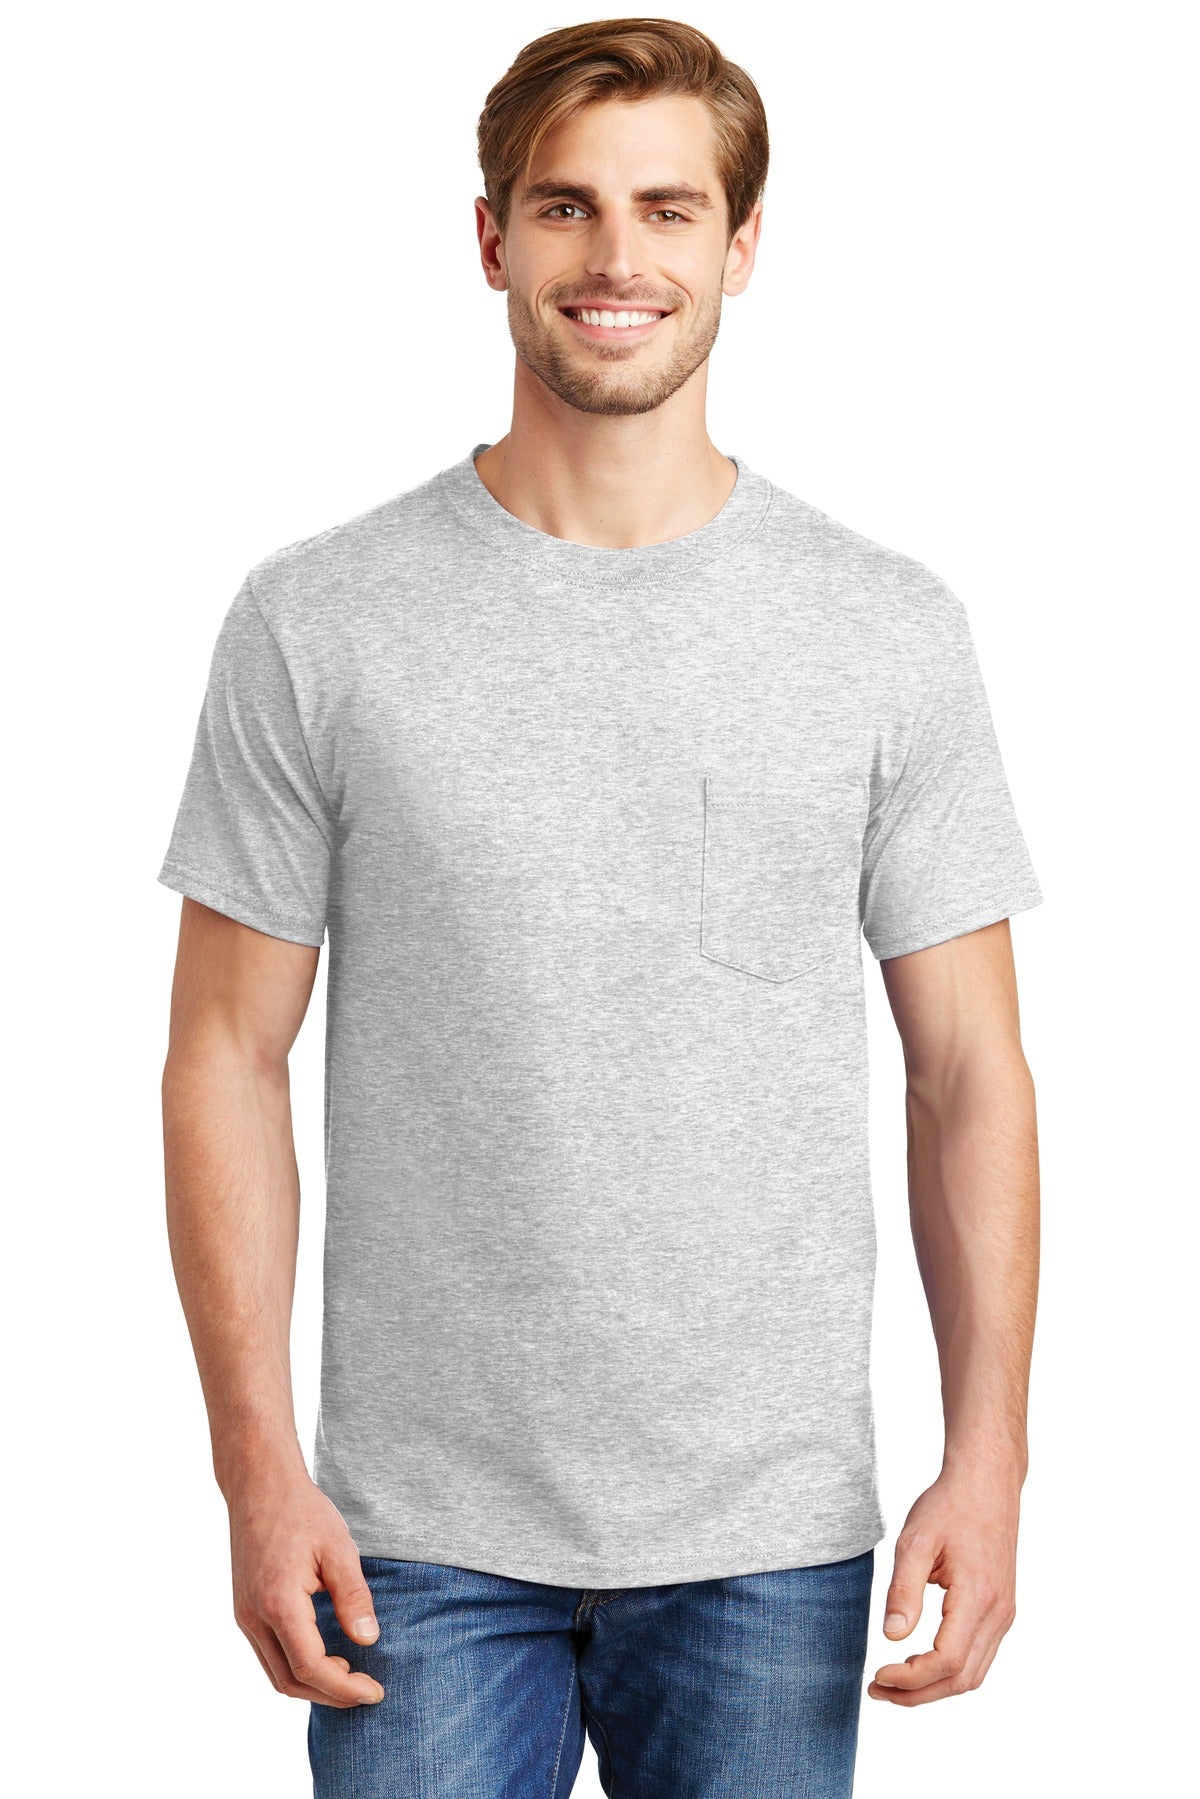 Hanes 4980 T-Shirt with Custom Embroidery